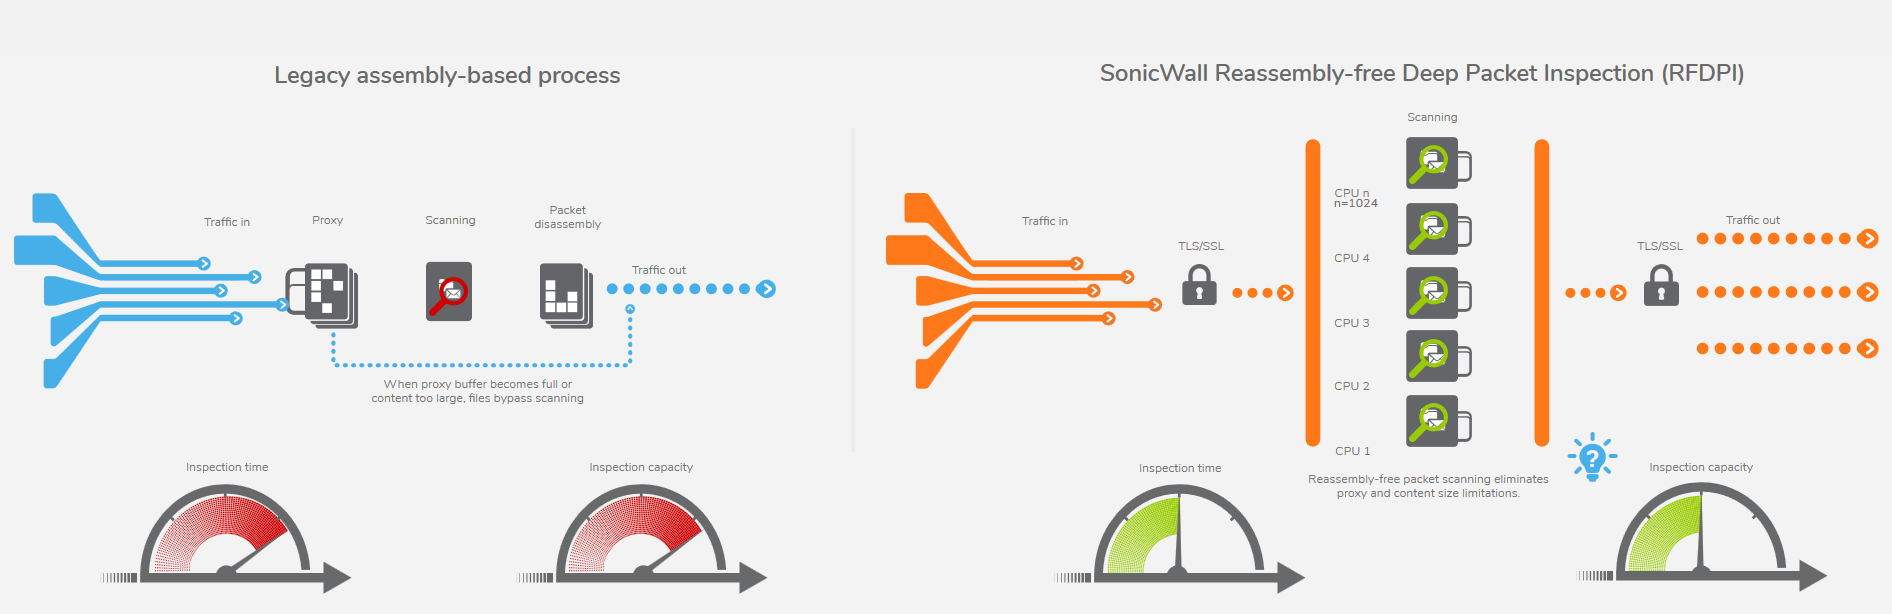 SonicWall Reassembly free Deep Packet Inspection RFDPI